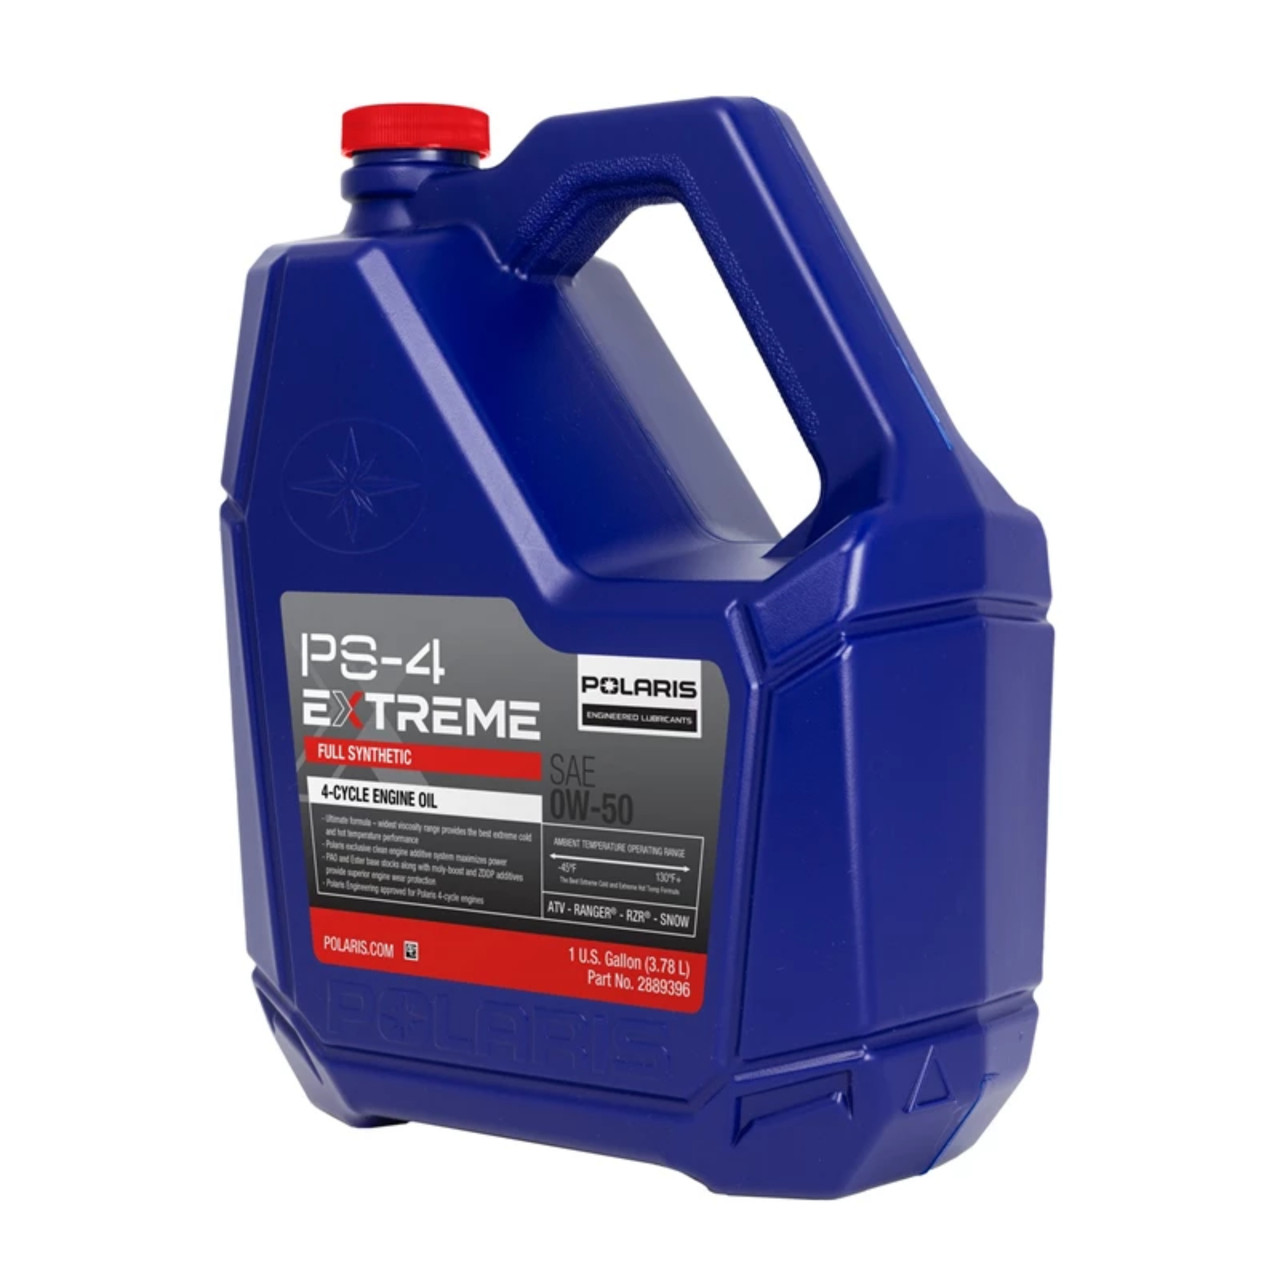 Polaris New OEM PS-4 Extreme Full Synthetic 0W-50 Engine Oil 1 Gallon 2889396